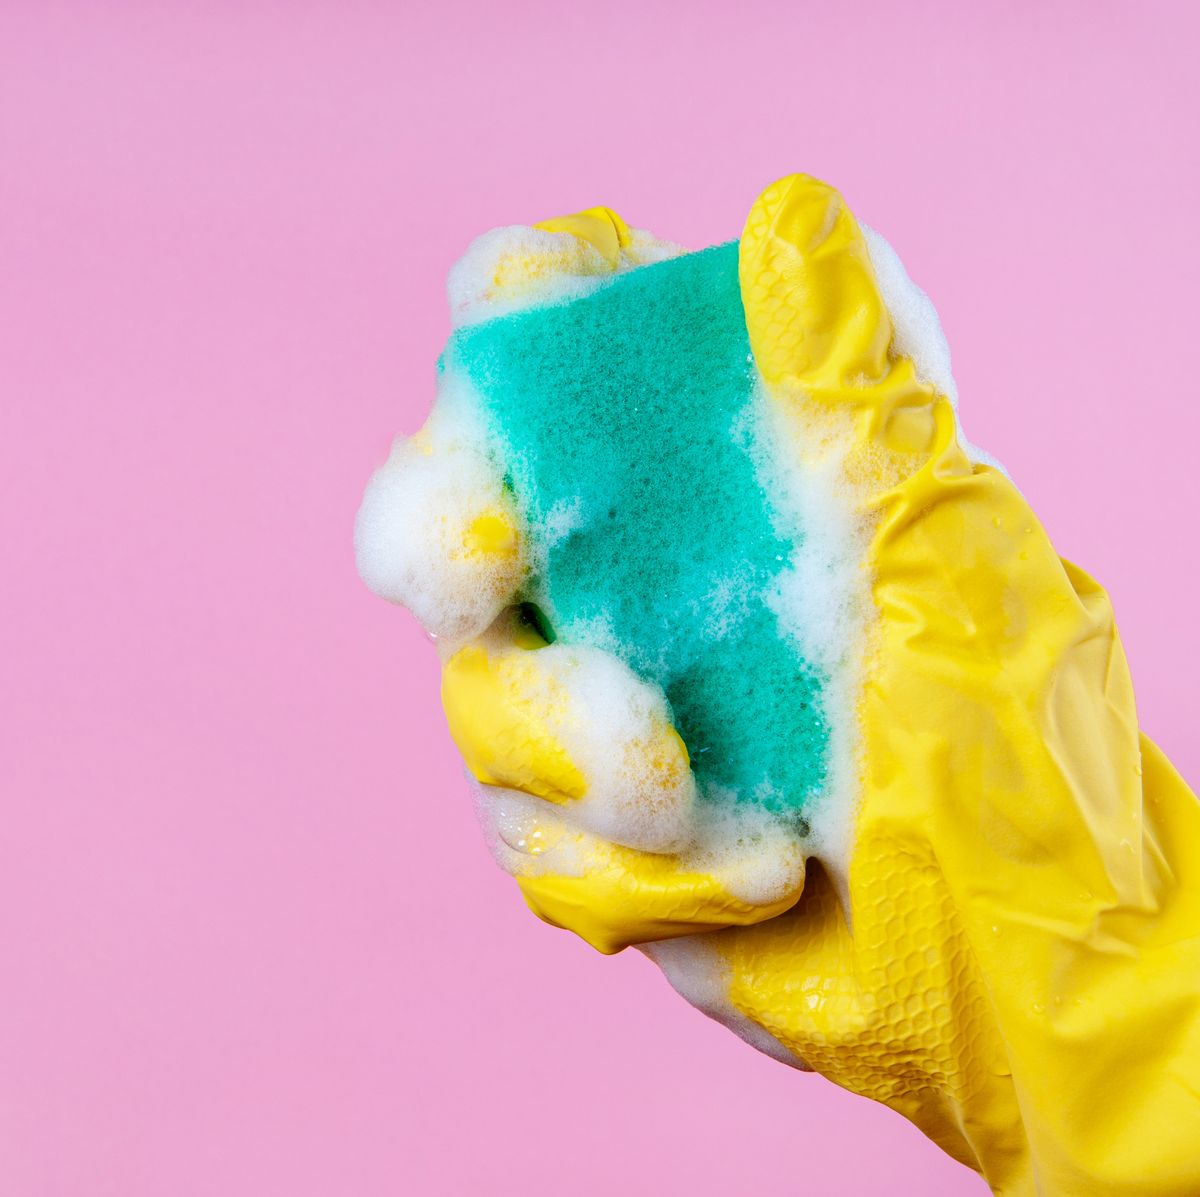 gloved hand holds a foam sponge on a pink background copy space